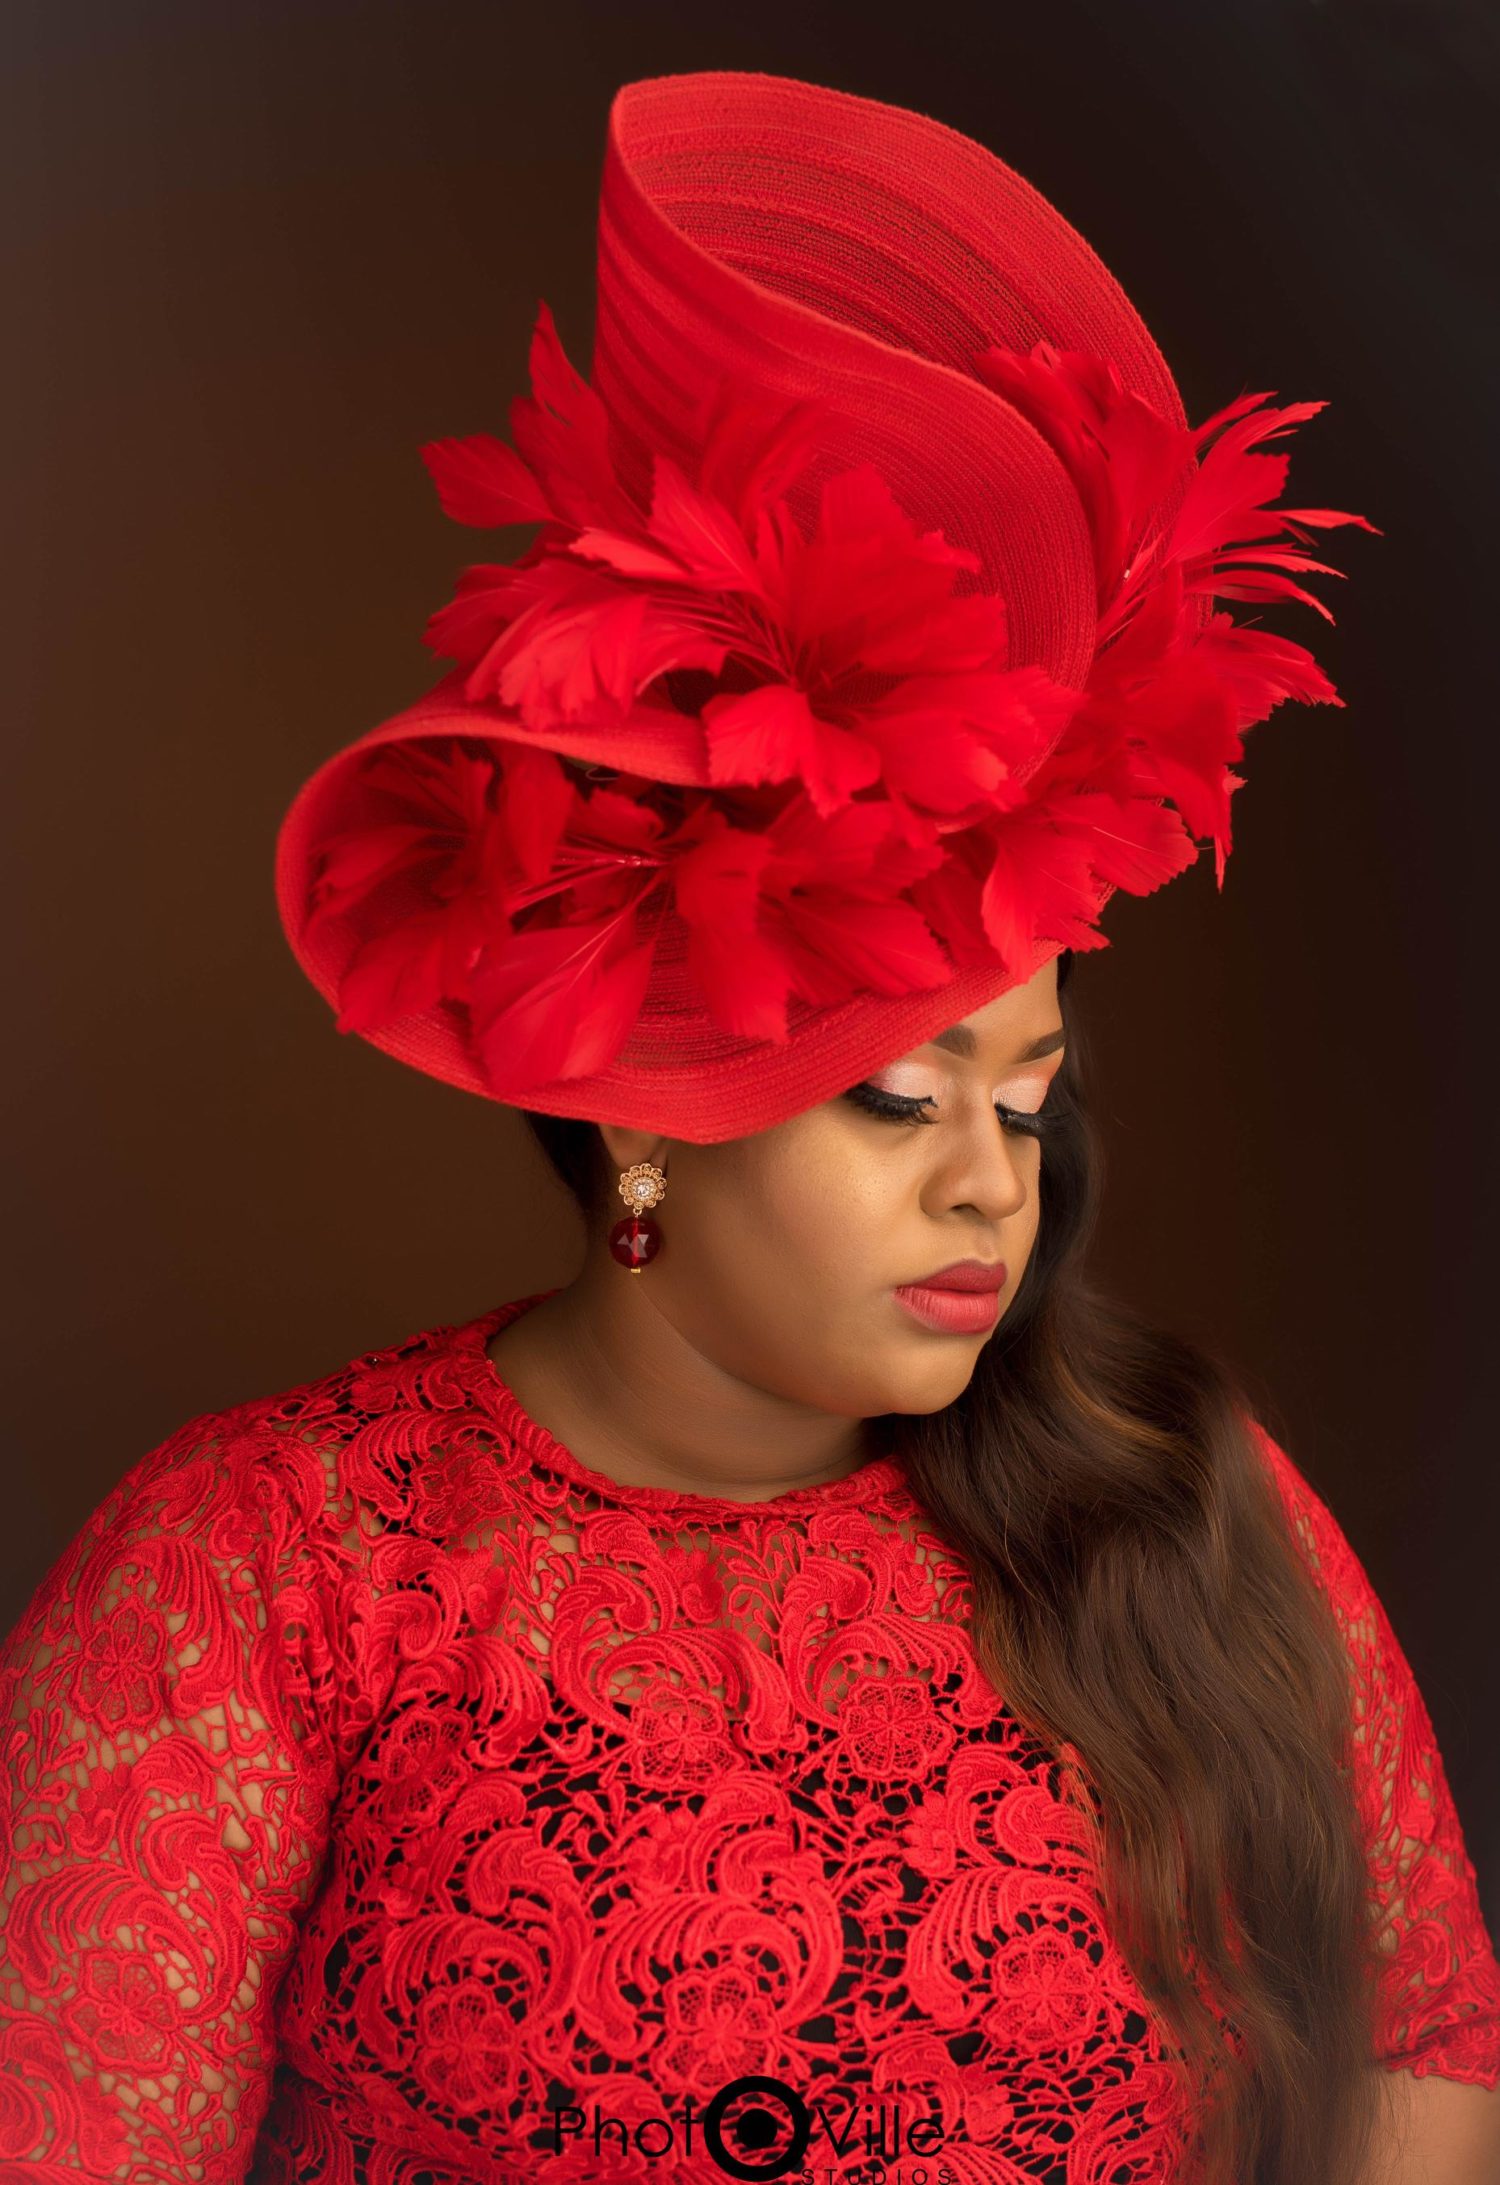 Behind Urezkulture: What do You Know About Creative Director and Milliner, Ijeure Onwadike?